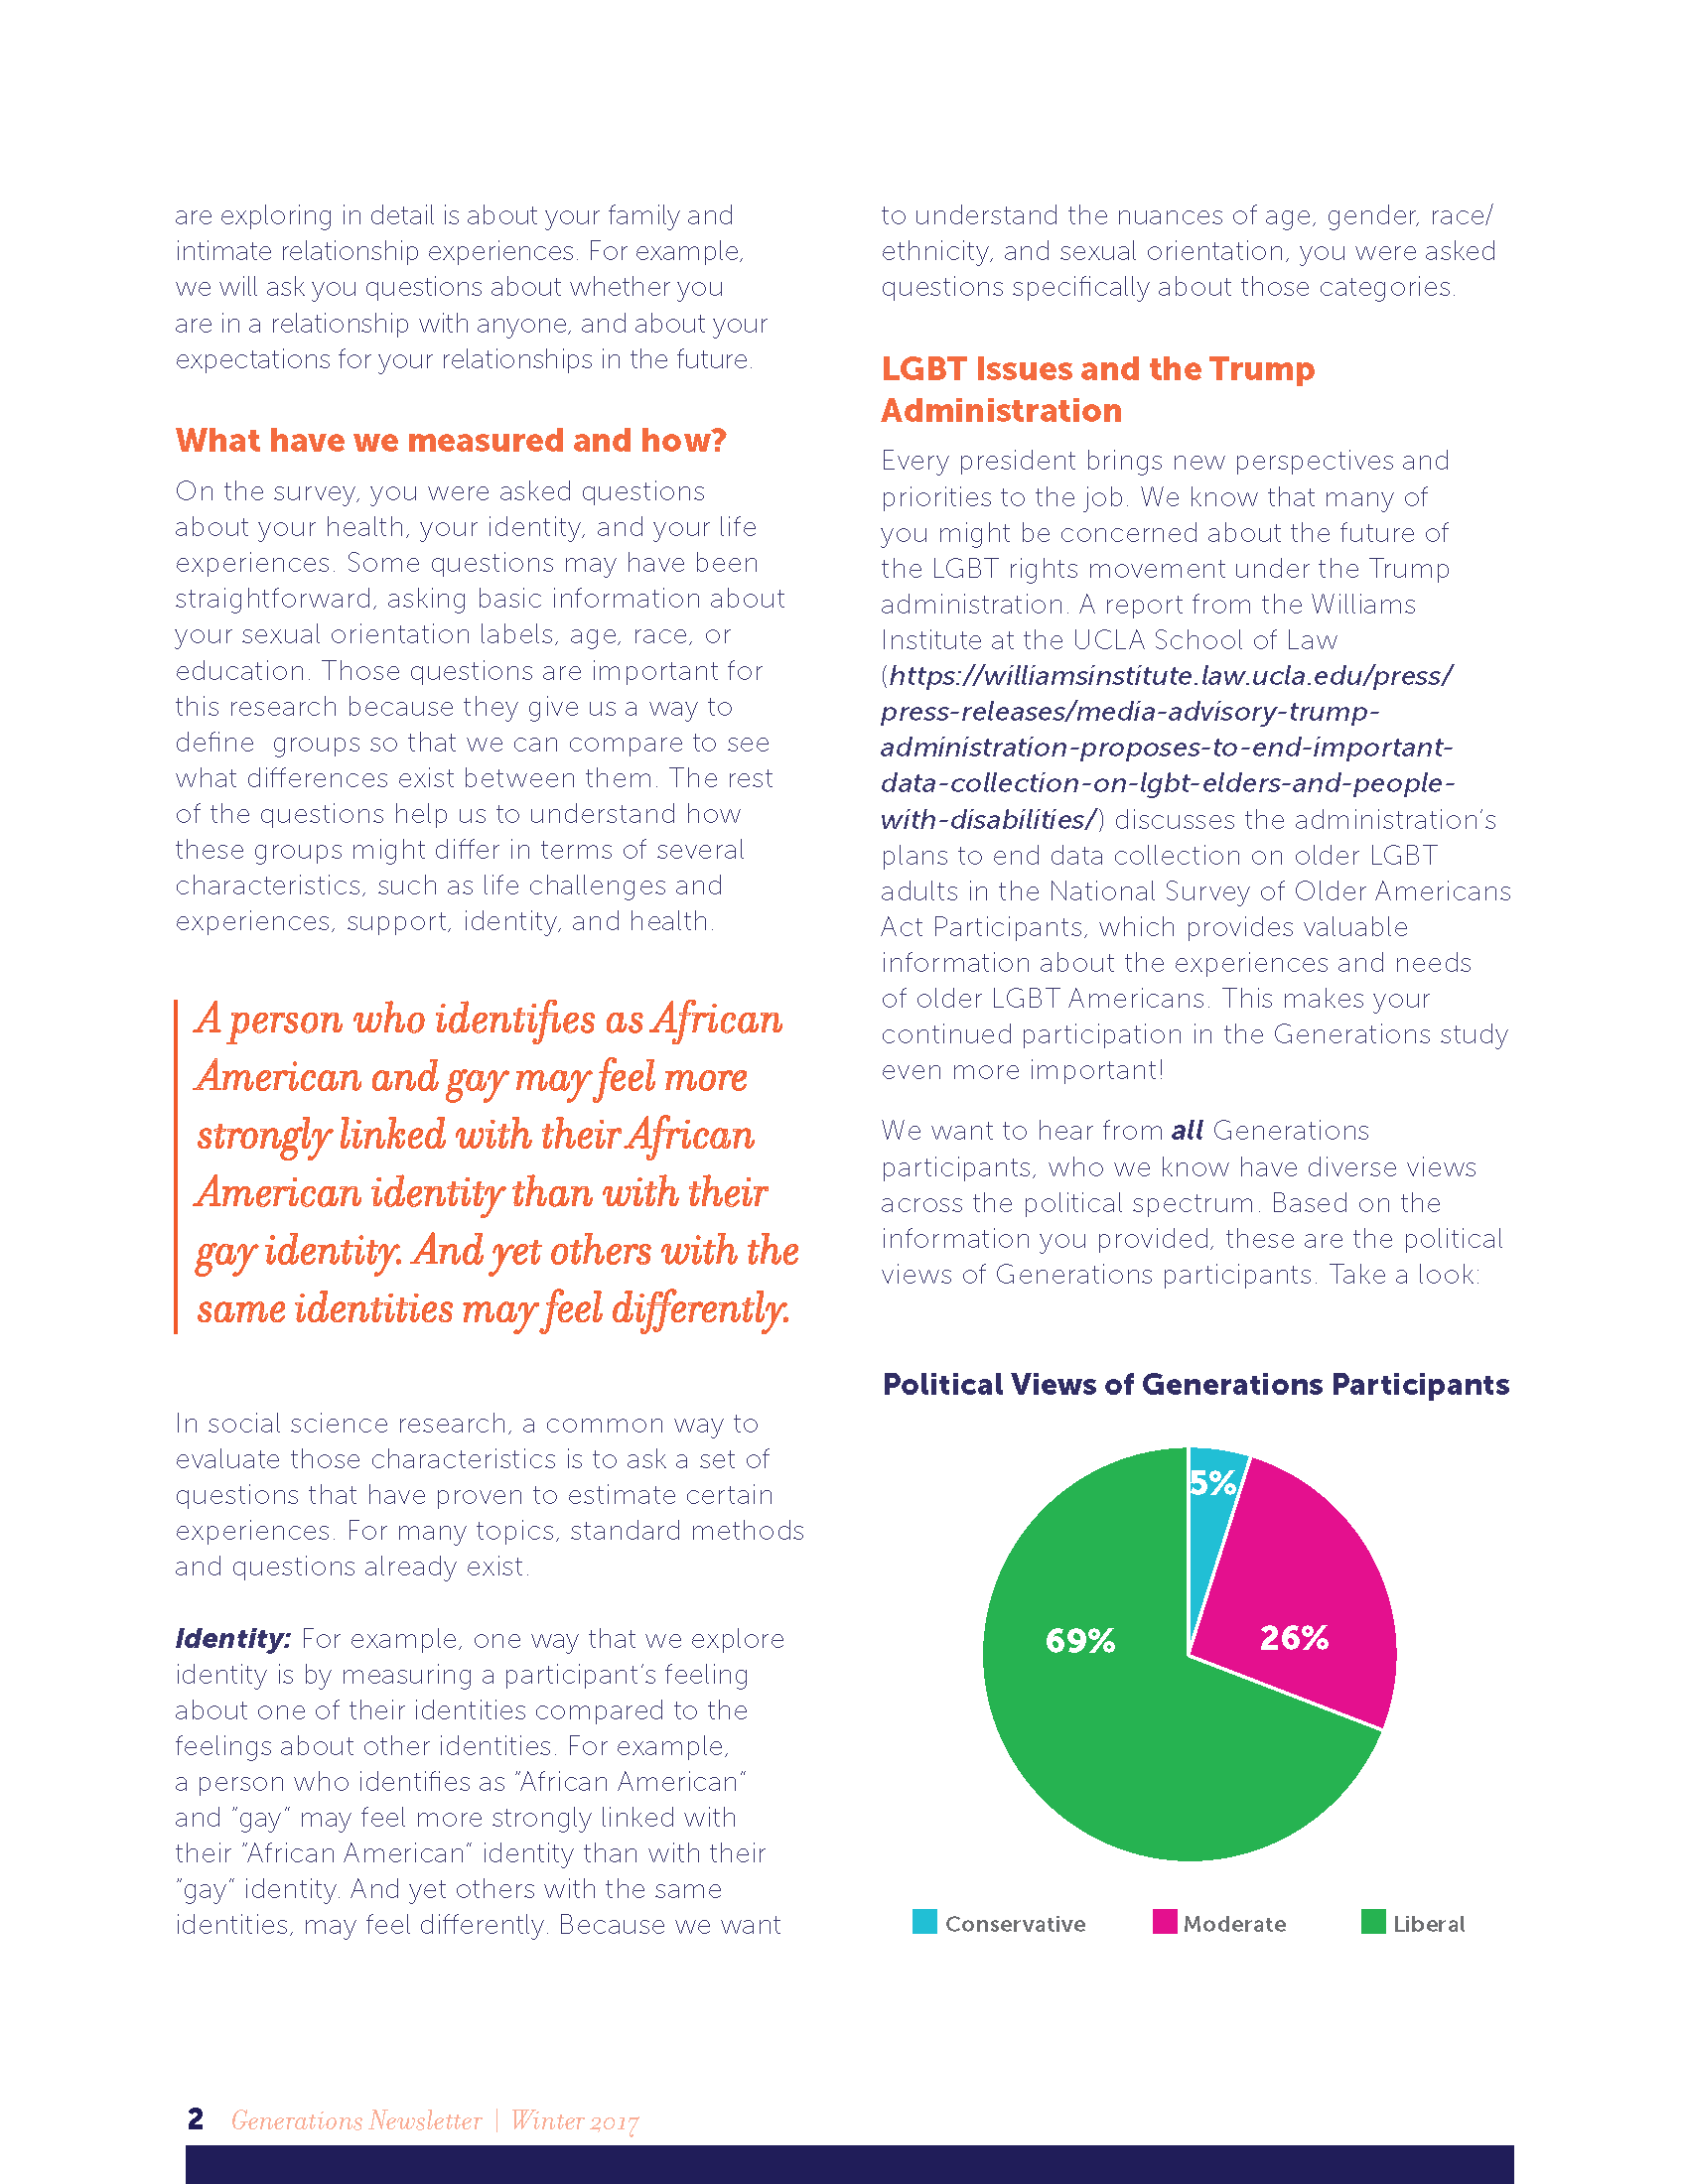 UCLAWI_GenerationsNewsletter_Winter2017_FINAL_Page_2.png